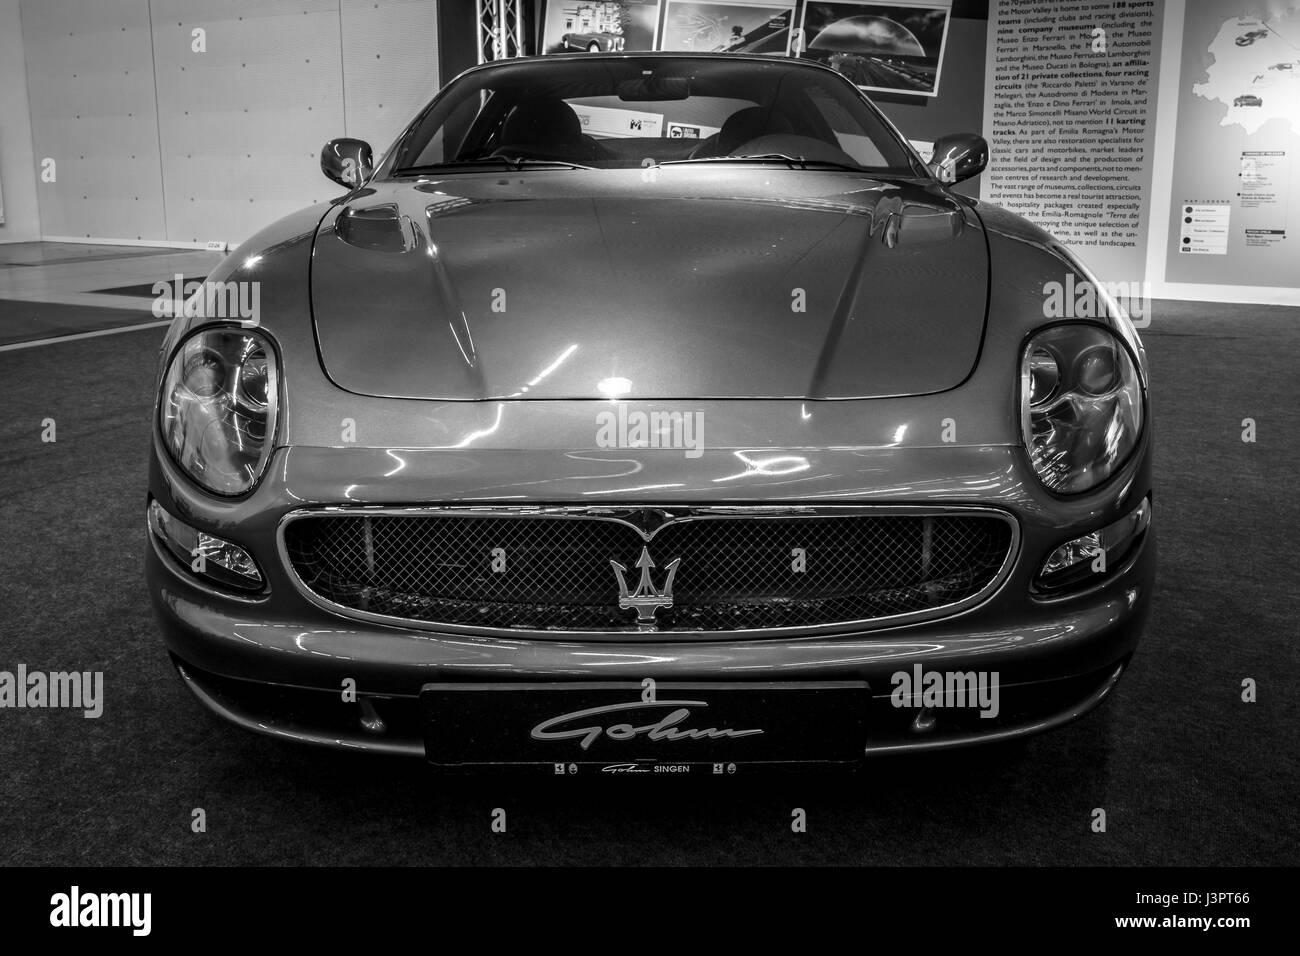 STUTTGART, GERMANY - MARCH 03, 2017: Grand Tourer car Maserati Coupe (Tipo M138), 2005. Black and white. Europe's greatest classic car exhibition 'RETRO CLASSICS' Stock Photo